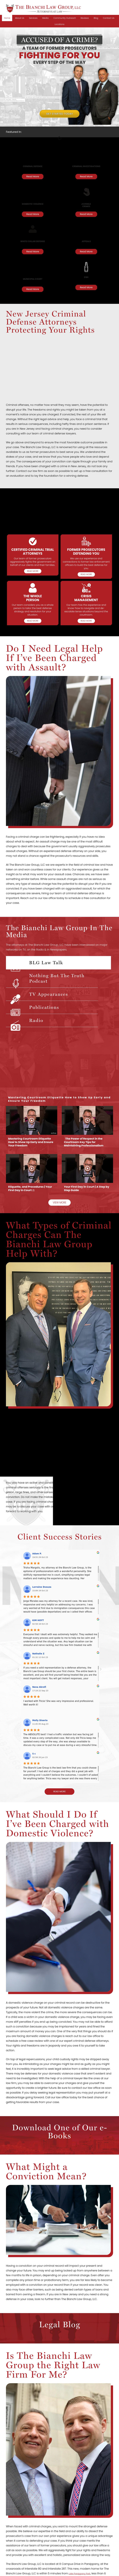 The Bianchi Law Group, LLC - Red Bank NJ Lawyers